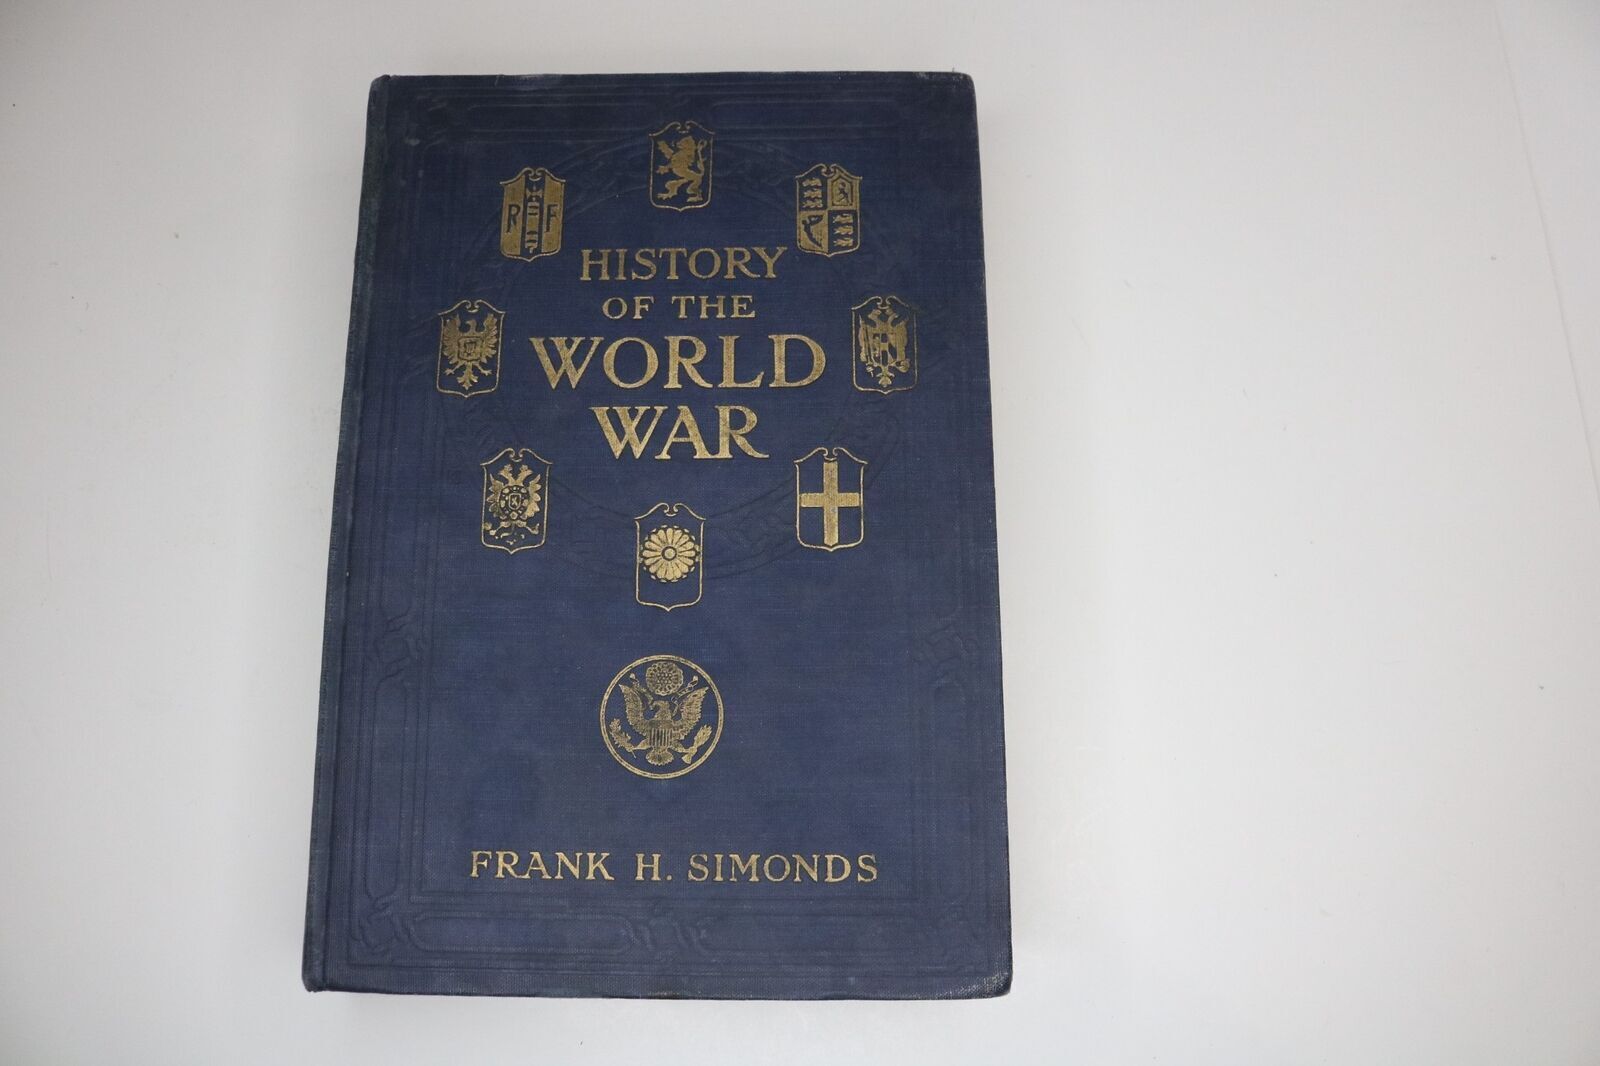 History of The World War by Frank H. Simond, Vol 5, Copyright 1920